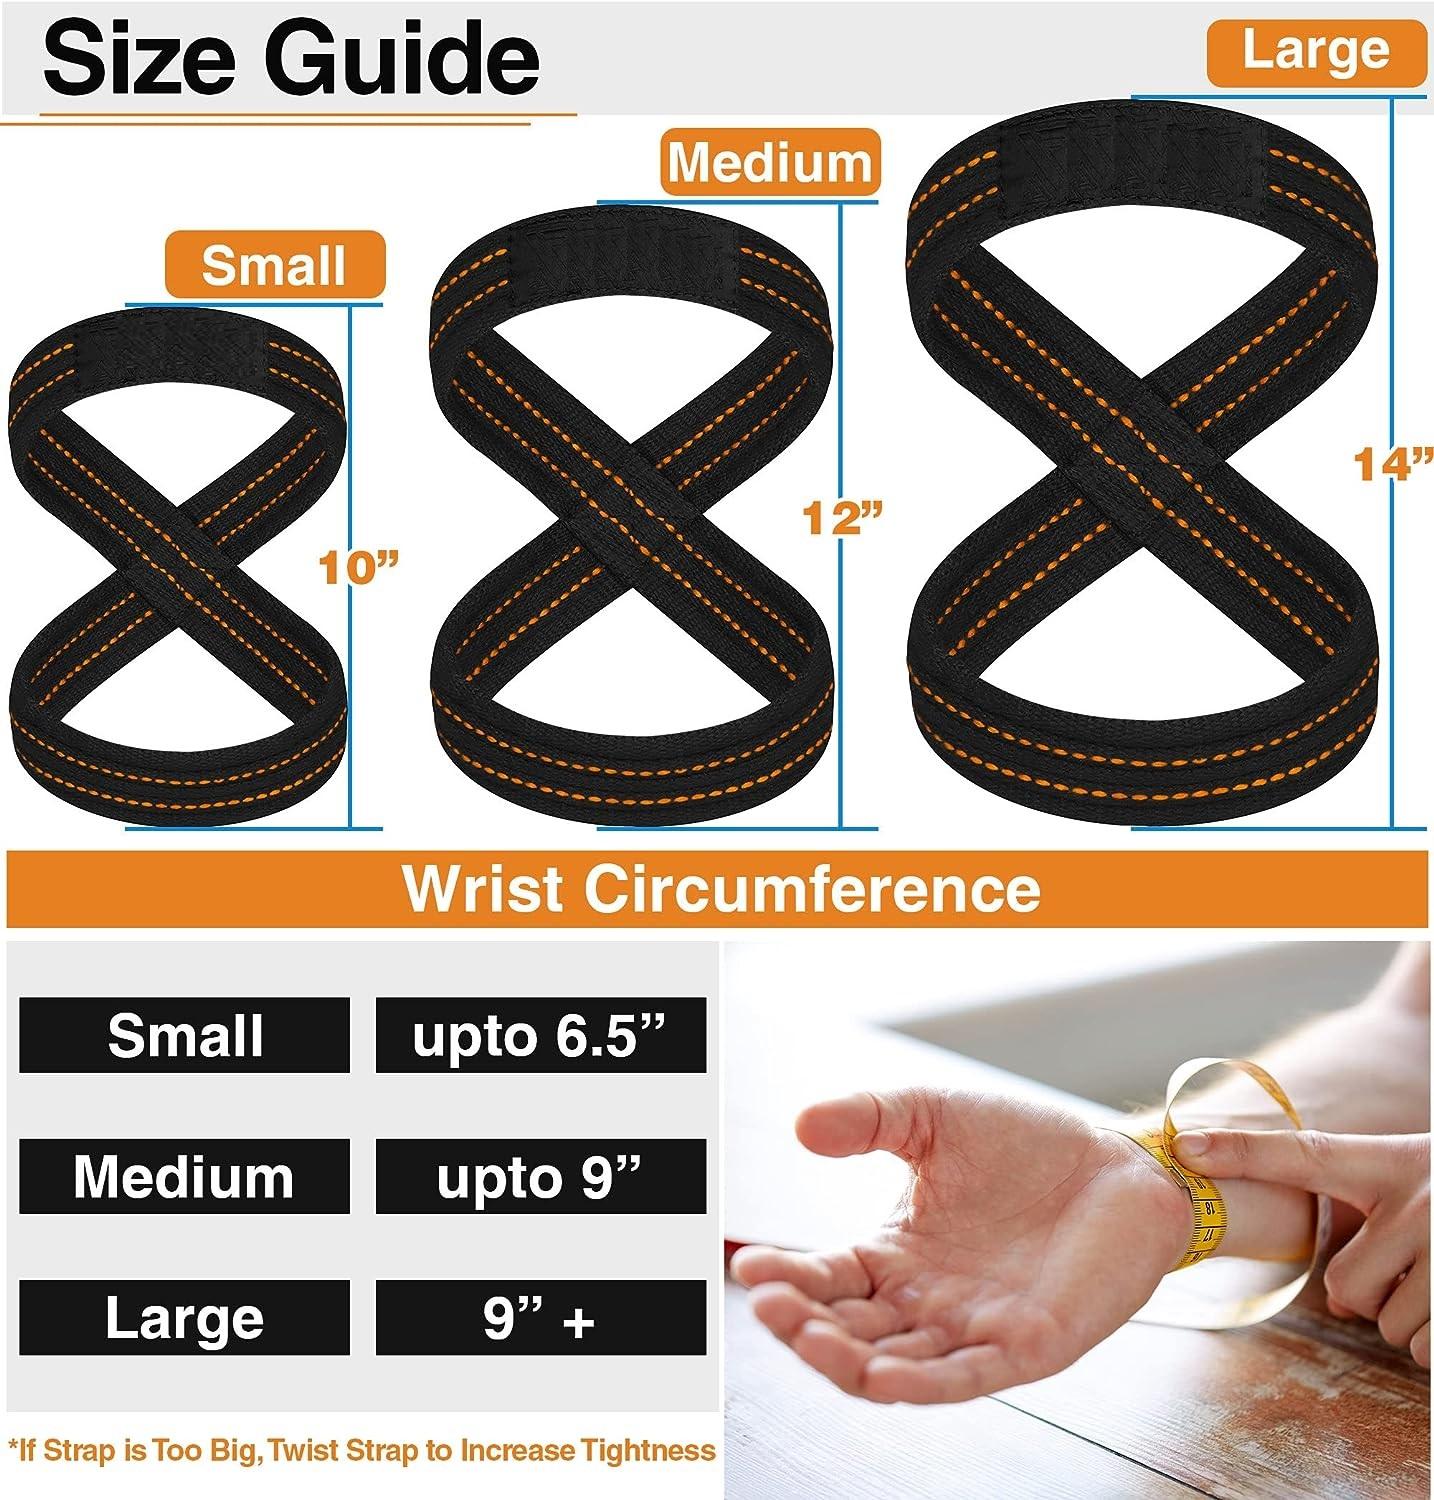 Weight Lifting Straps Figure 8, Anti Slip Strap with cuffs wrist Support for Gym Workout Deadlift Powerlifting Bodybuilding Weightlifting, Fitness Strength Training, Hand Bar Grip for Men size chart